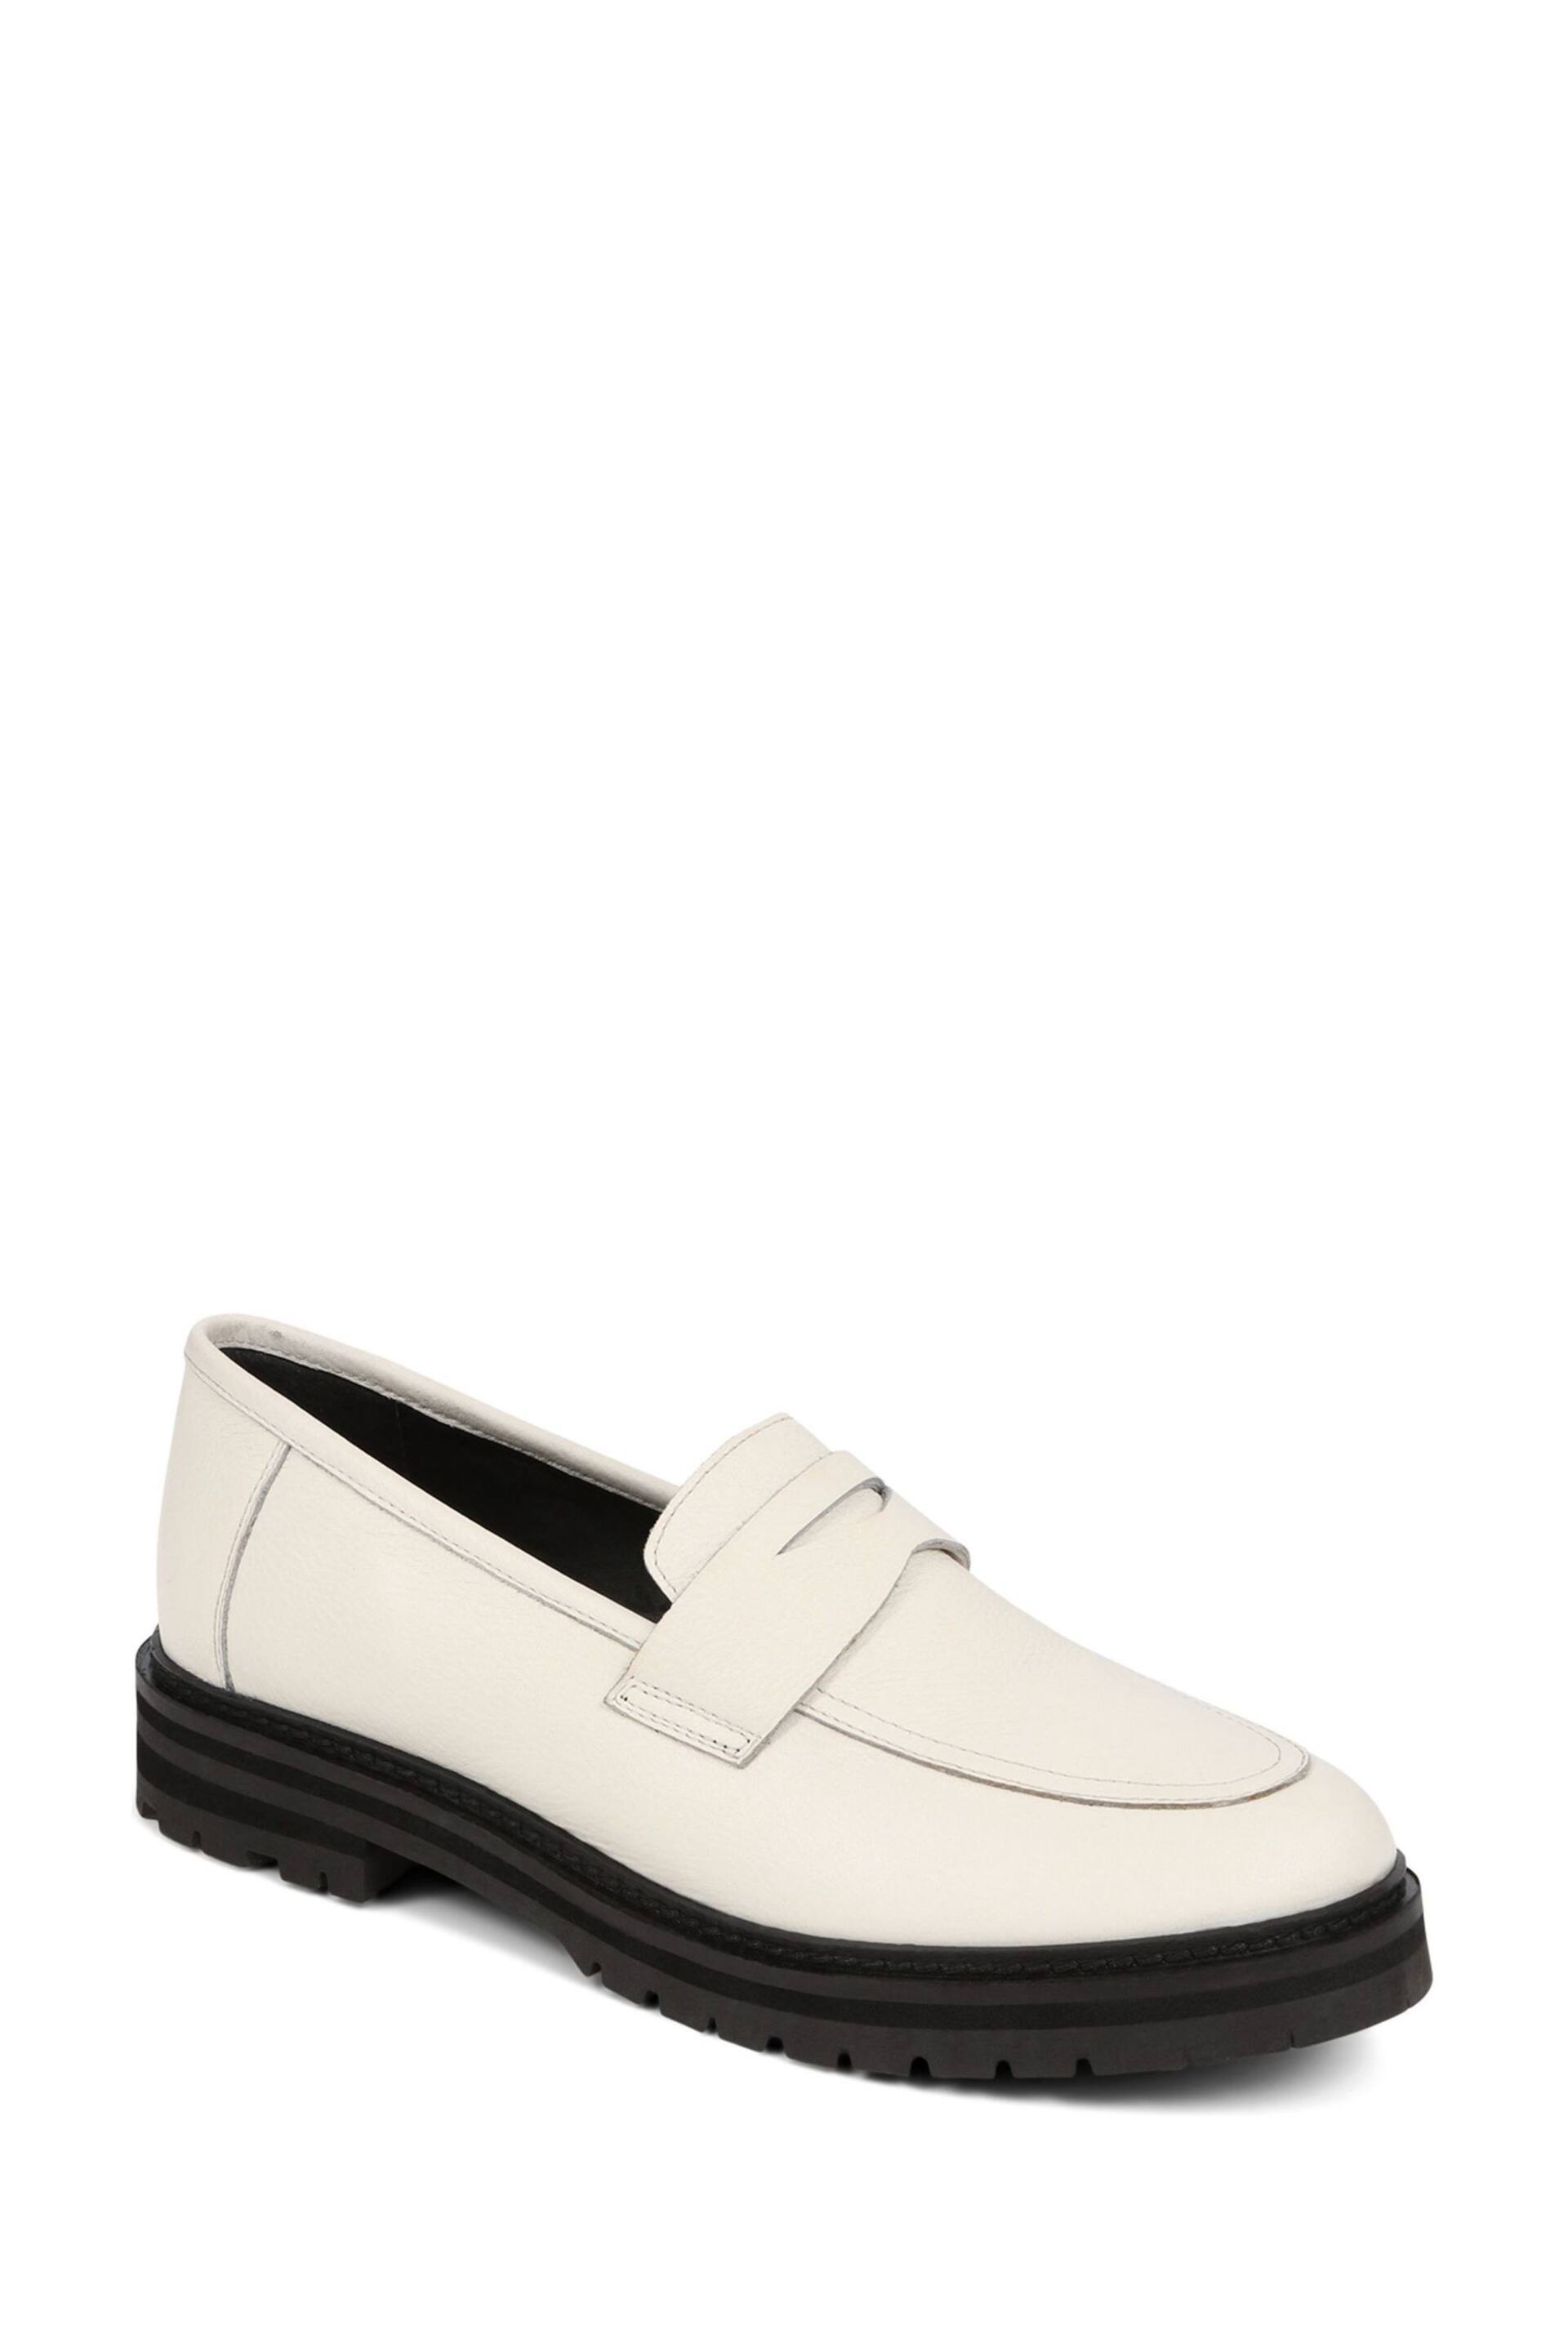 Jones Bootmaker Dara2 Leather White Loafers - Image 2 of 5